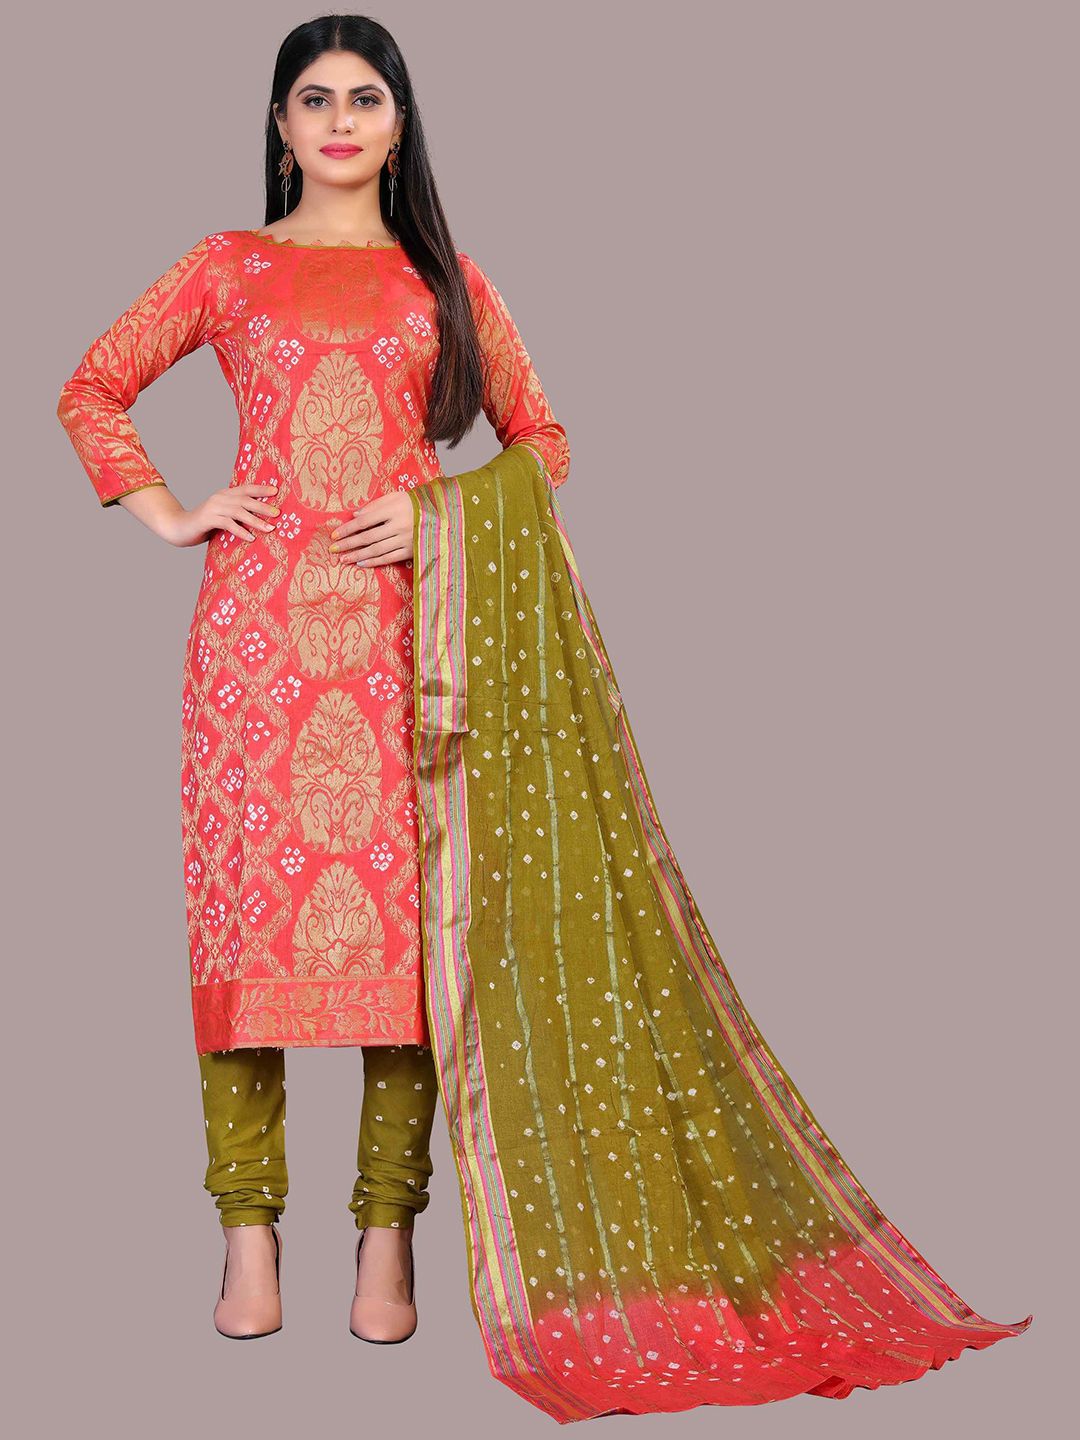 Divine International Trading Co Peach & Olive Bandhani Dyed Cotton Dress Material Price in India